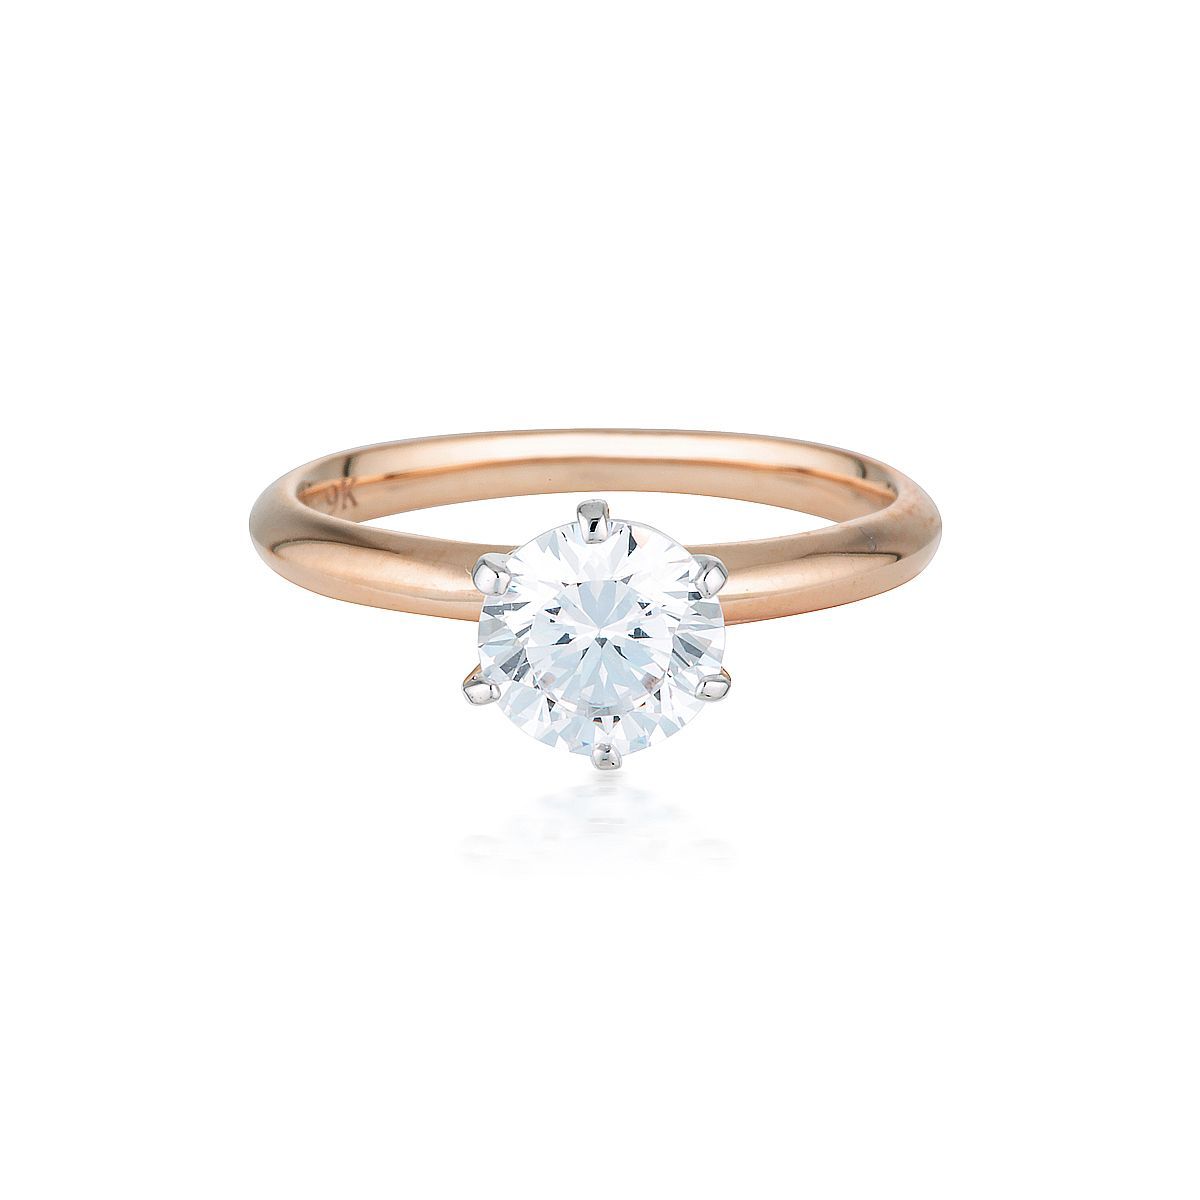 Georgini - Round Brilliant Cut 1.25Ct Cubic Zirconia Solitaire With Knife Edge Band In 9Ct Rose Gold